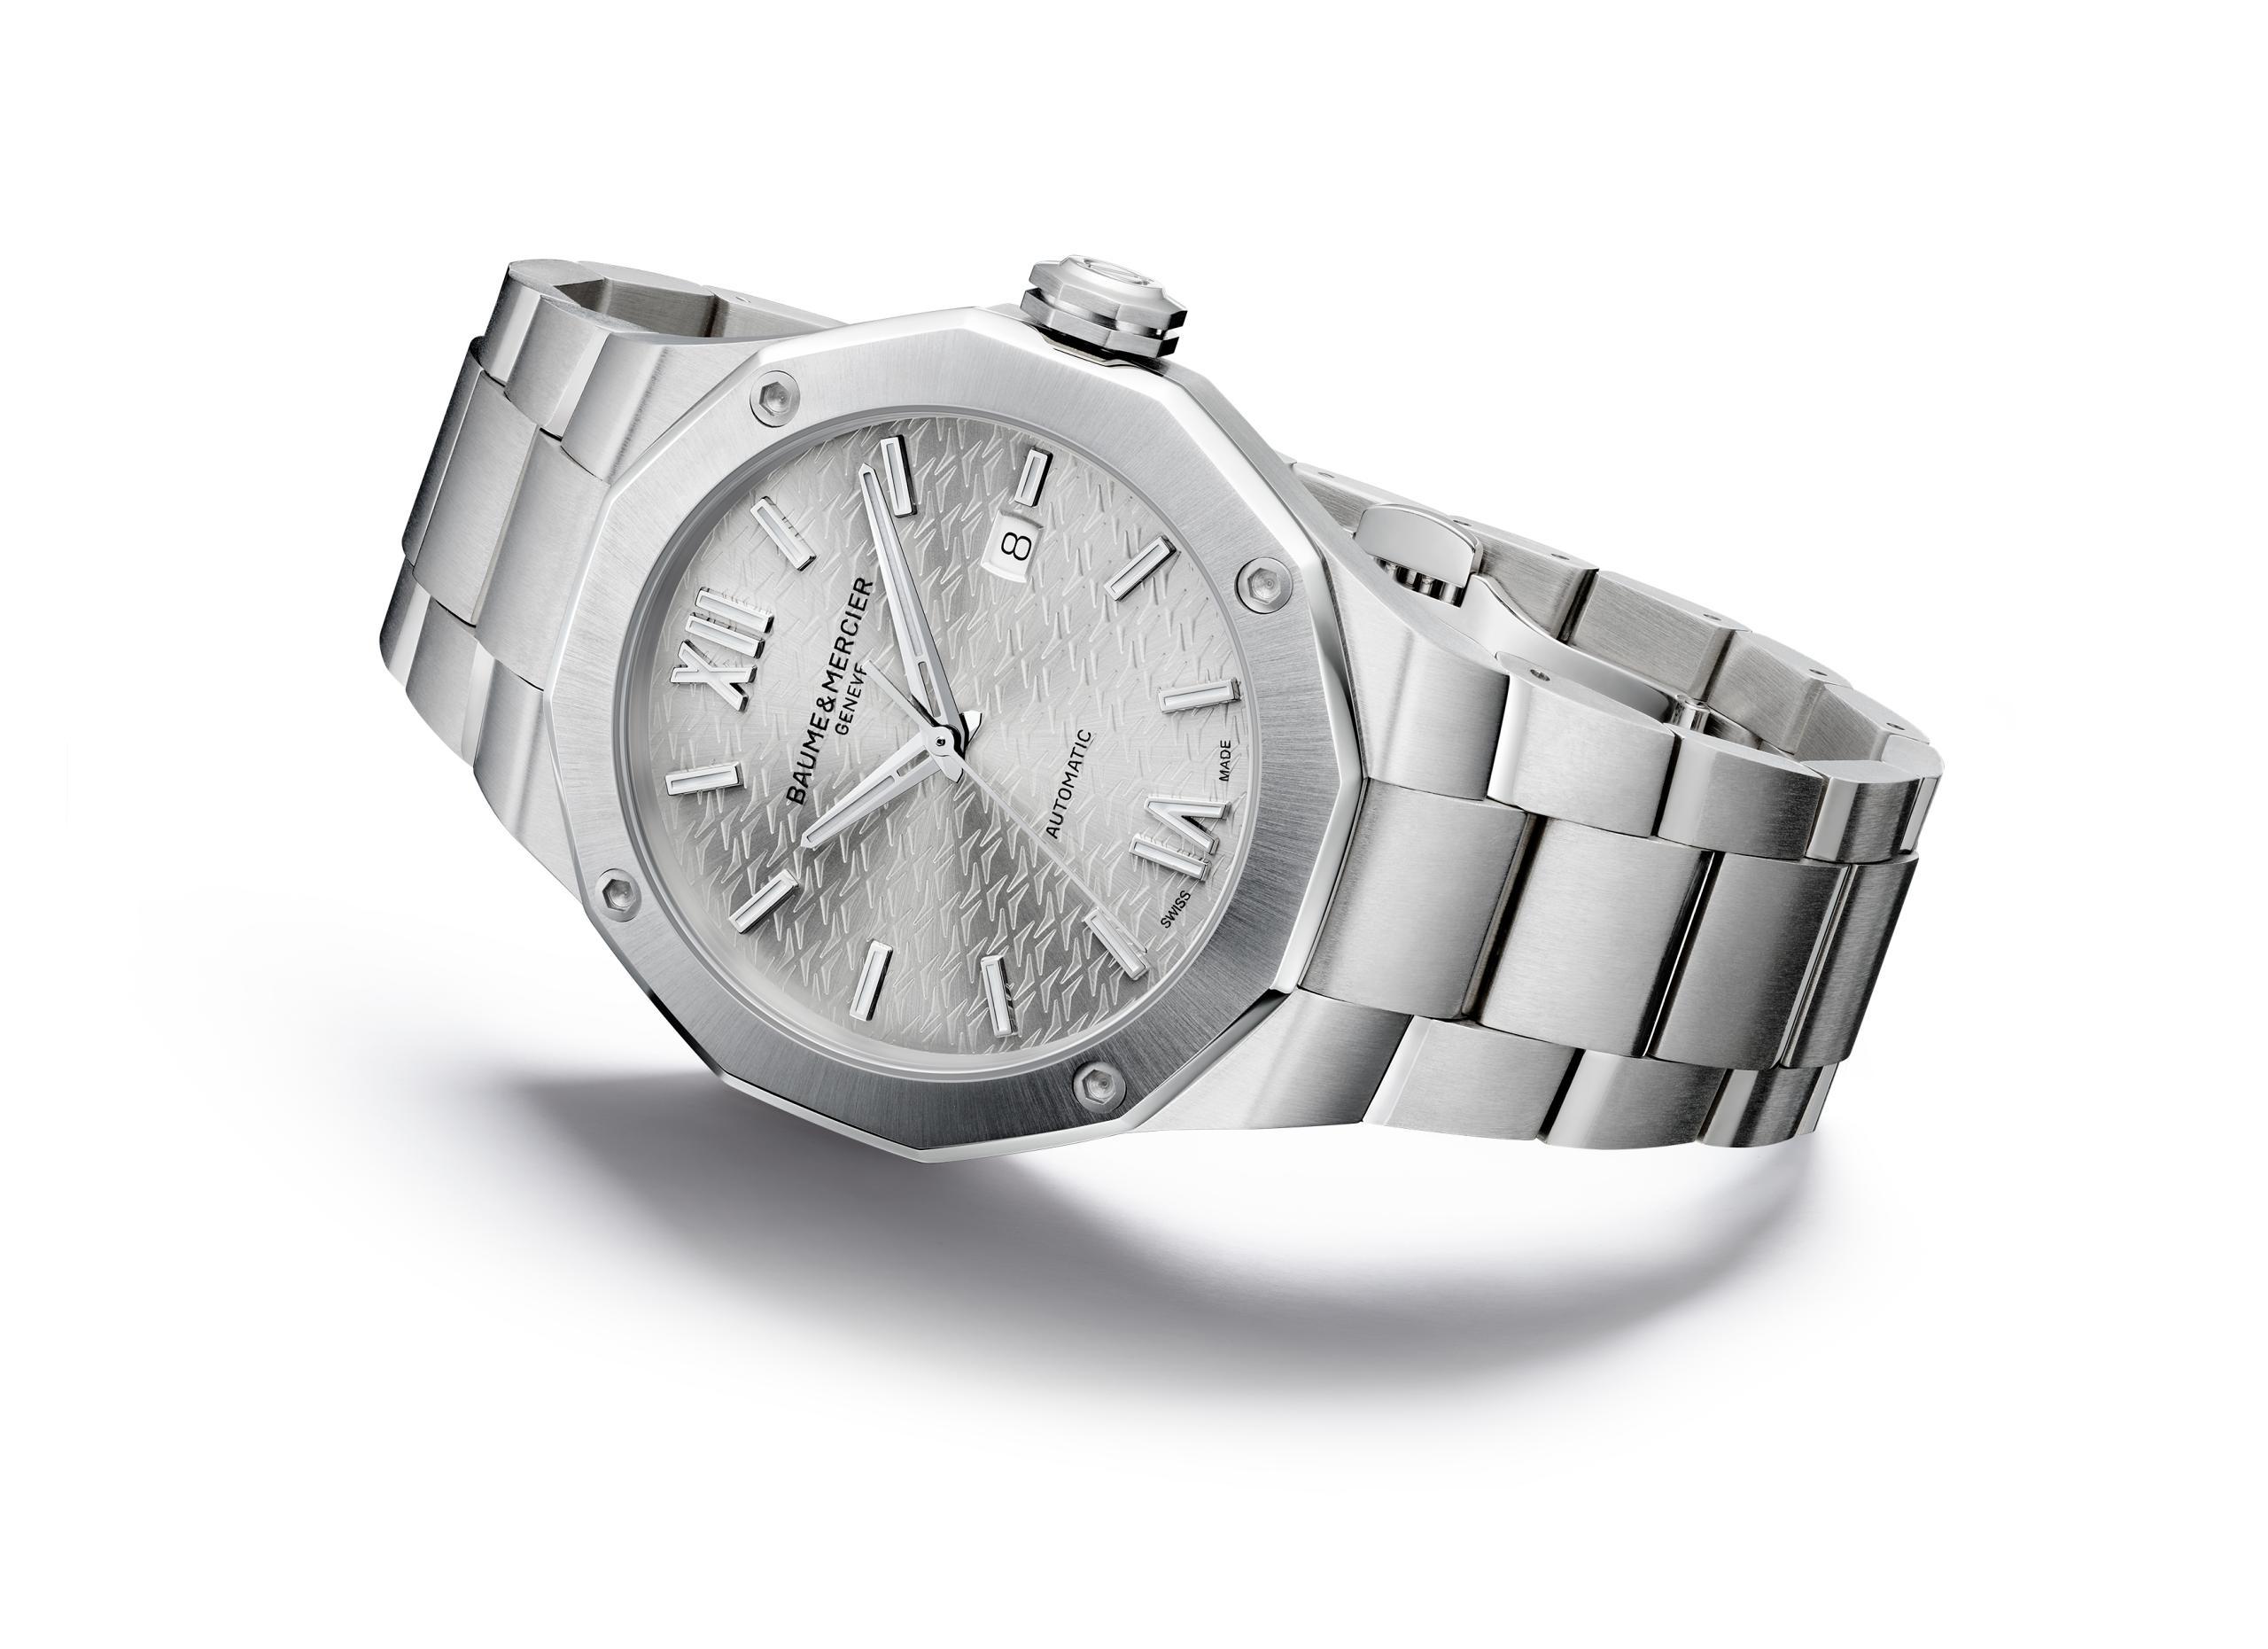 Introducing The Baume & Mercier Riviera Watch Collection